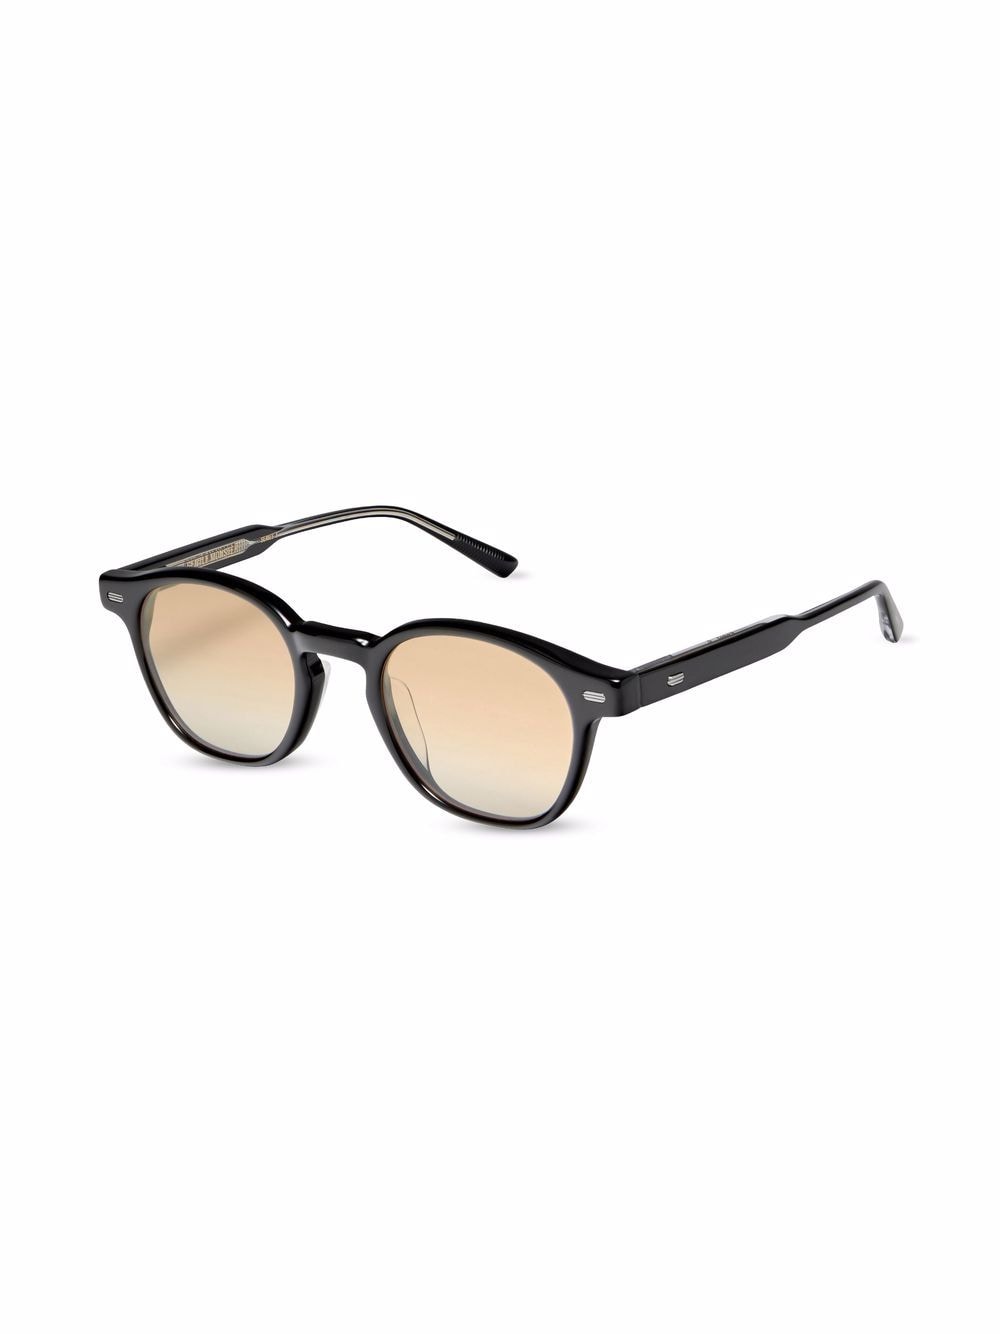 Image 2 of Gentle Monster Eddy A 01 round frame sunglasses